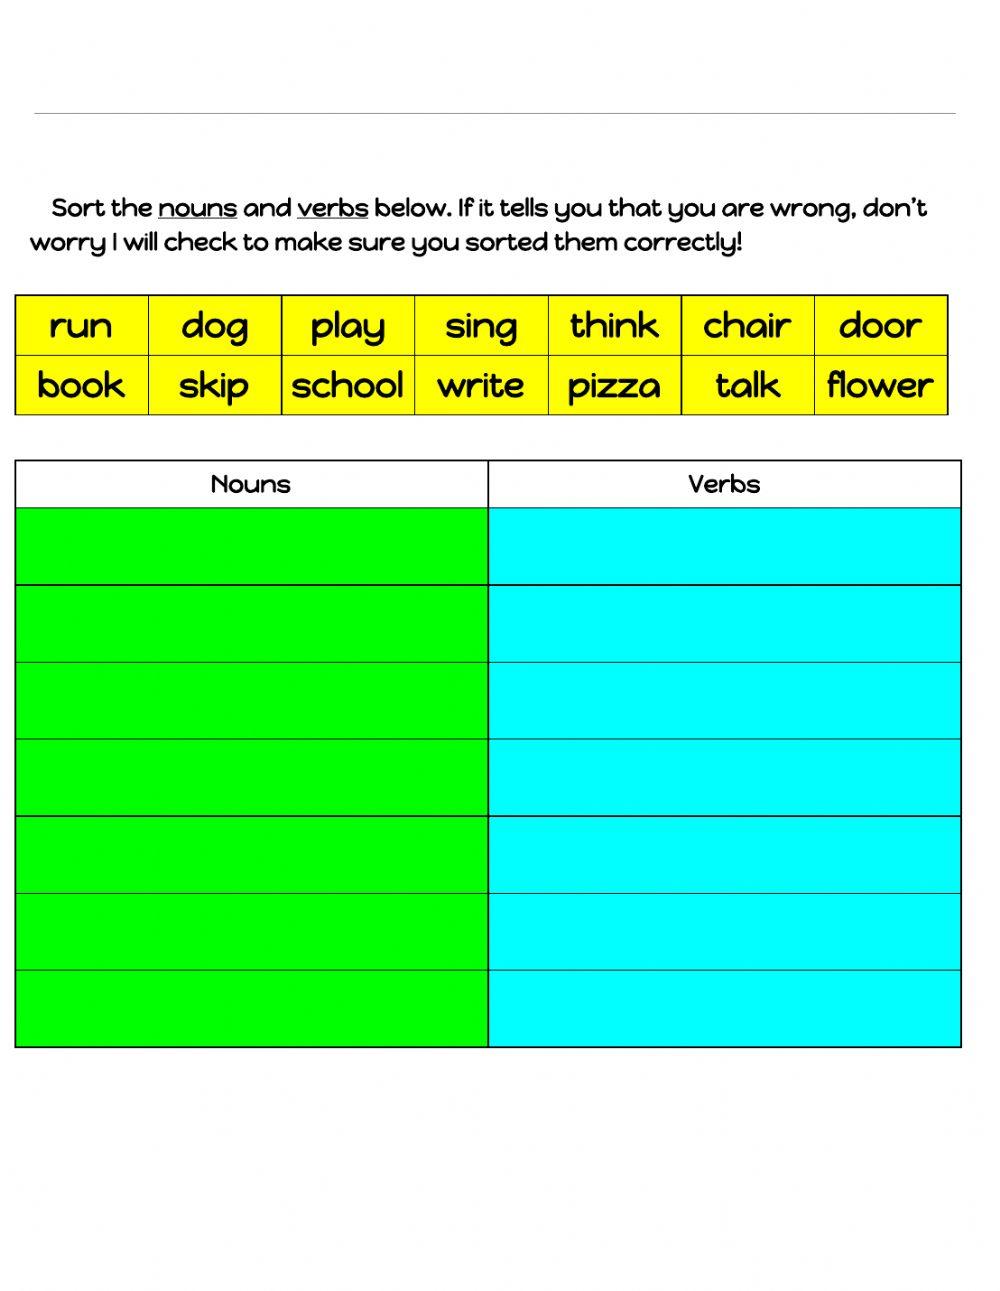 Adjectives, Nouns and Verbs review